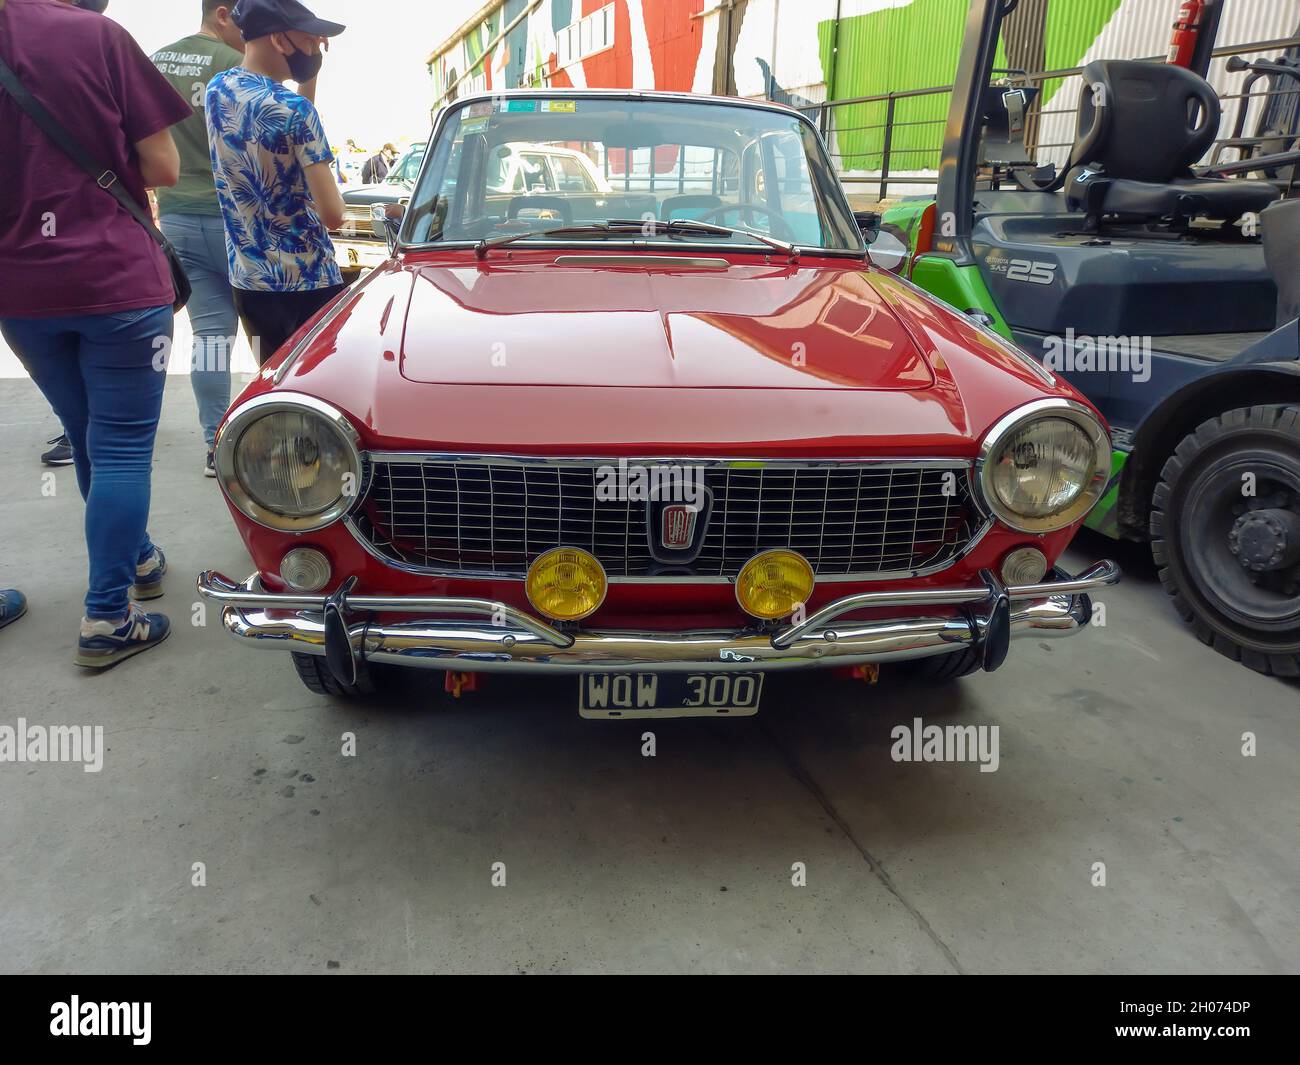 AVELLANEDA - BUENOS AIRES, ARGENTINA - Sep 27, 2021: Avellaneda, Argentina - Sept 26, 2021 - Fiat 1500 coupe Vignale 1970. Red sporty classic car buil Stock Photo